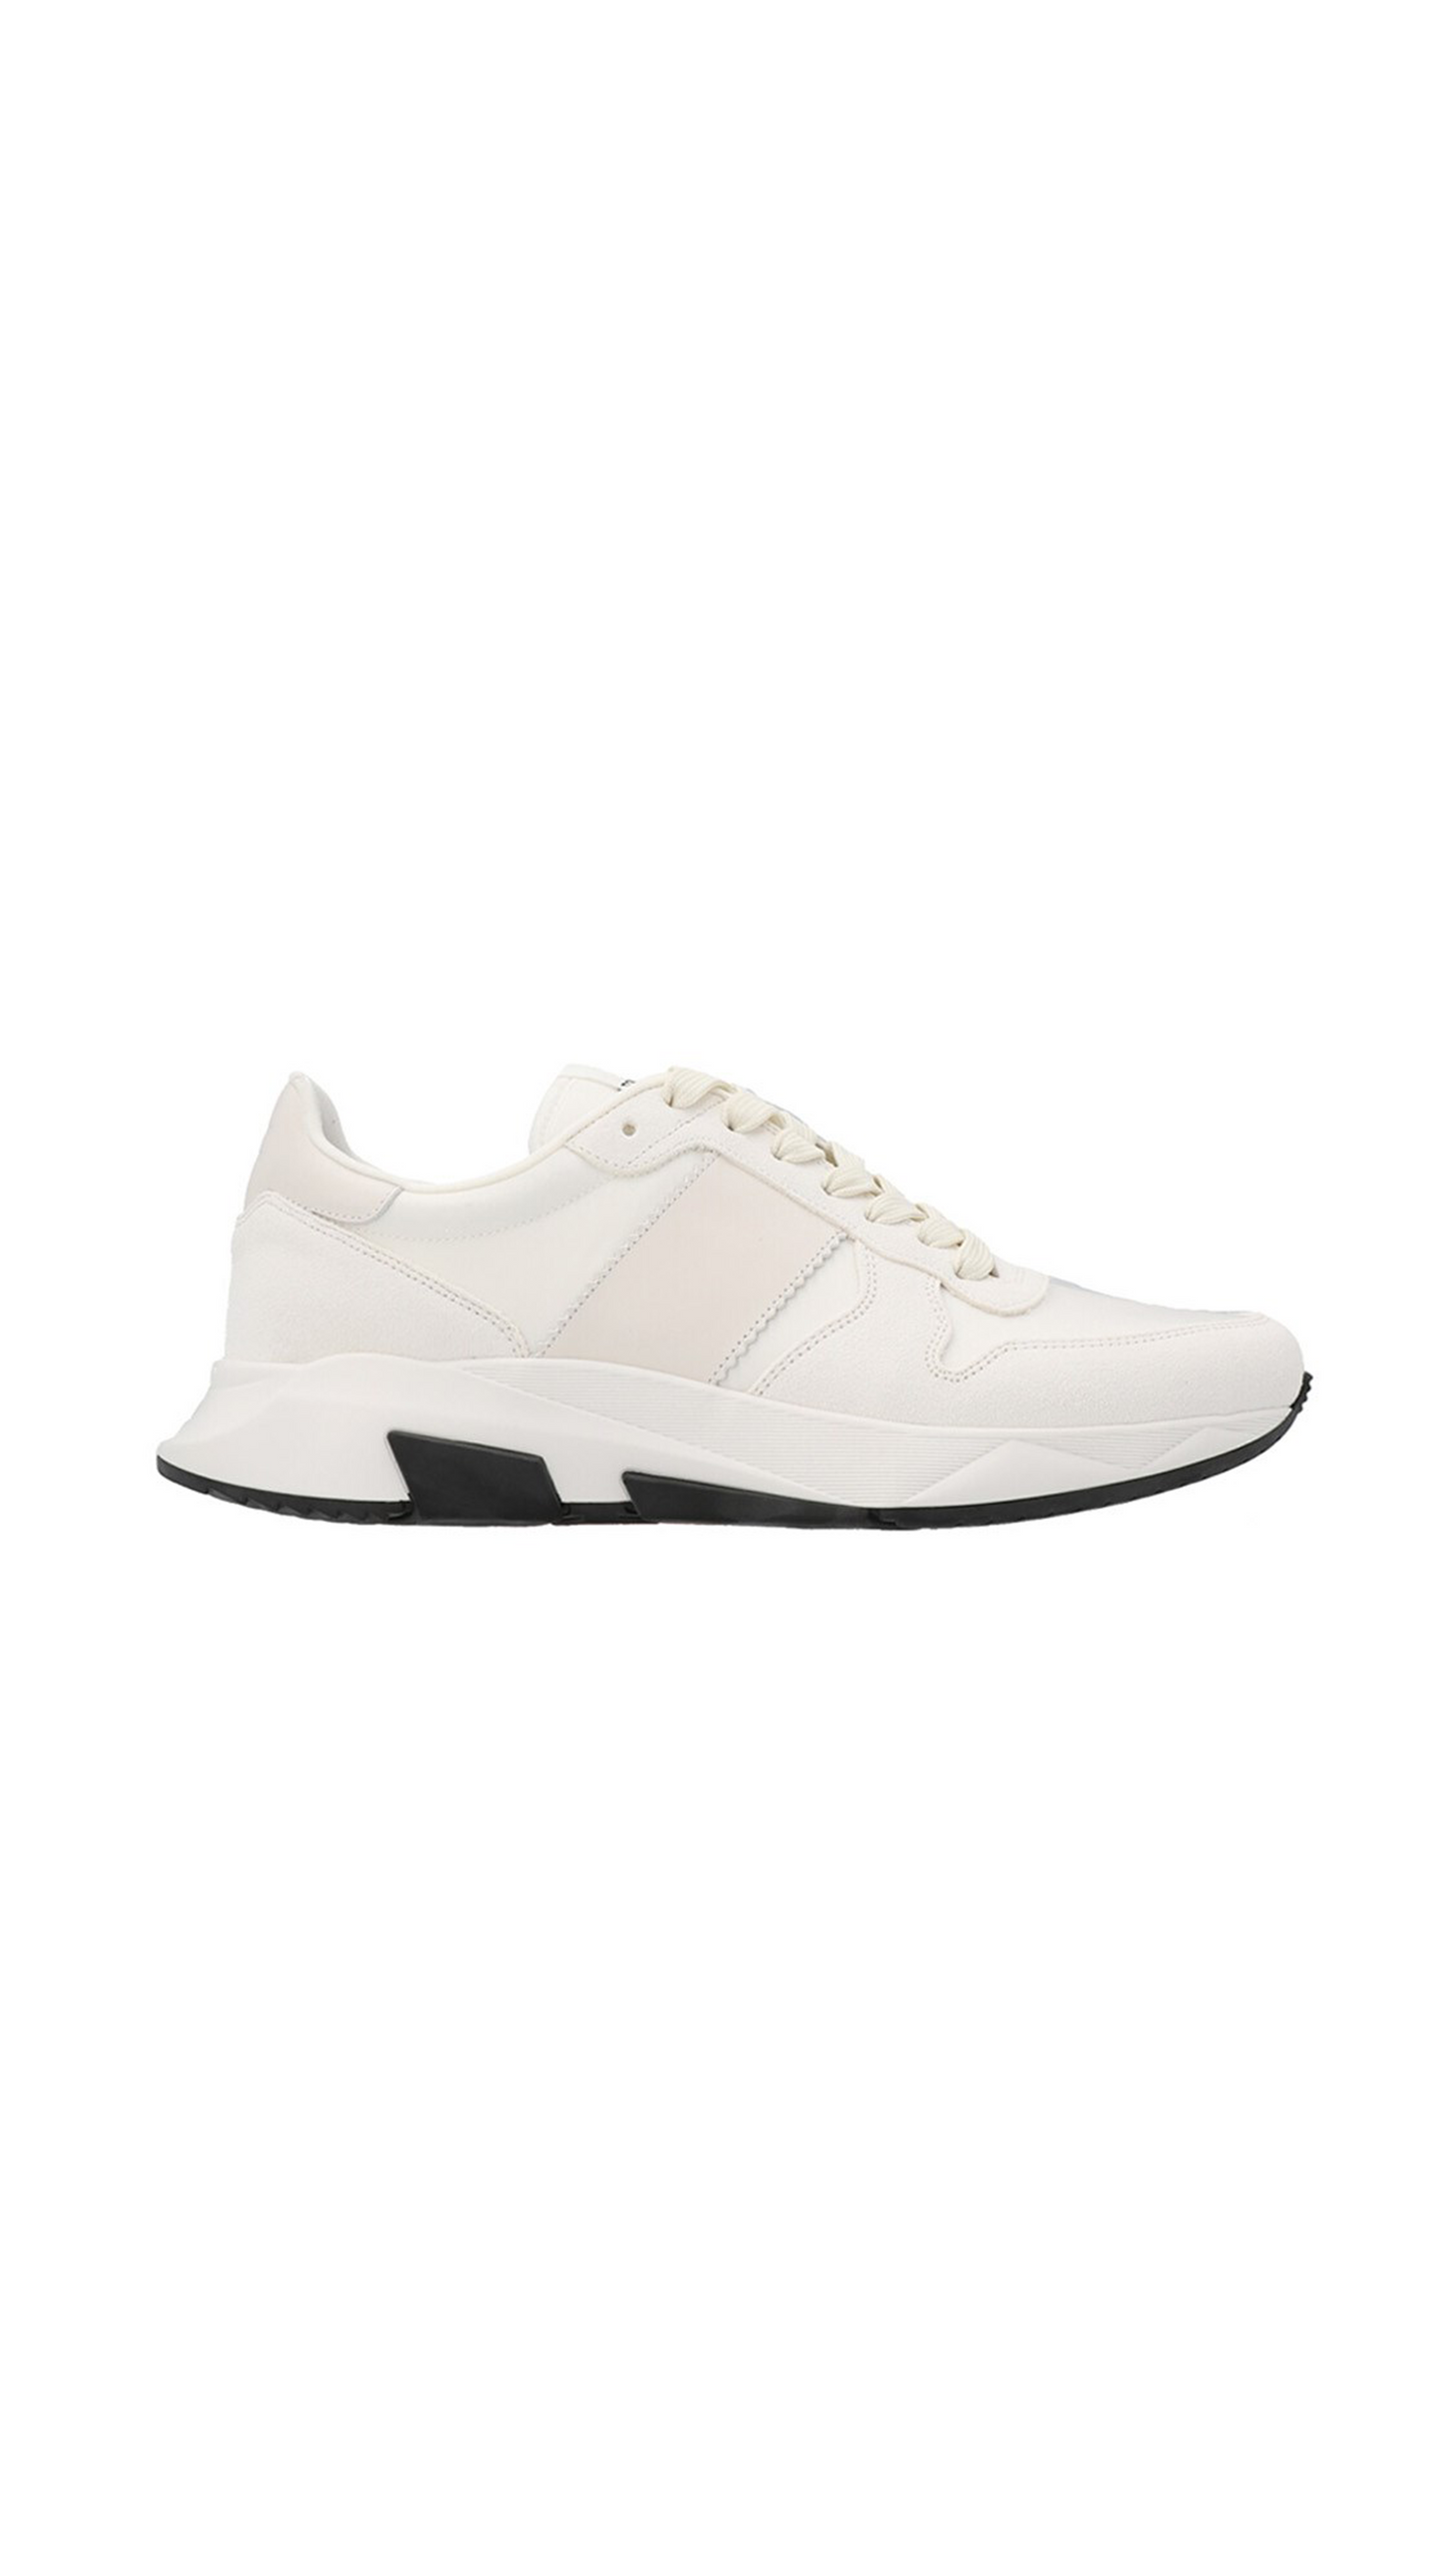 Jagga Leather-Trimmed Nylon and Suede Sneakers - White